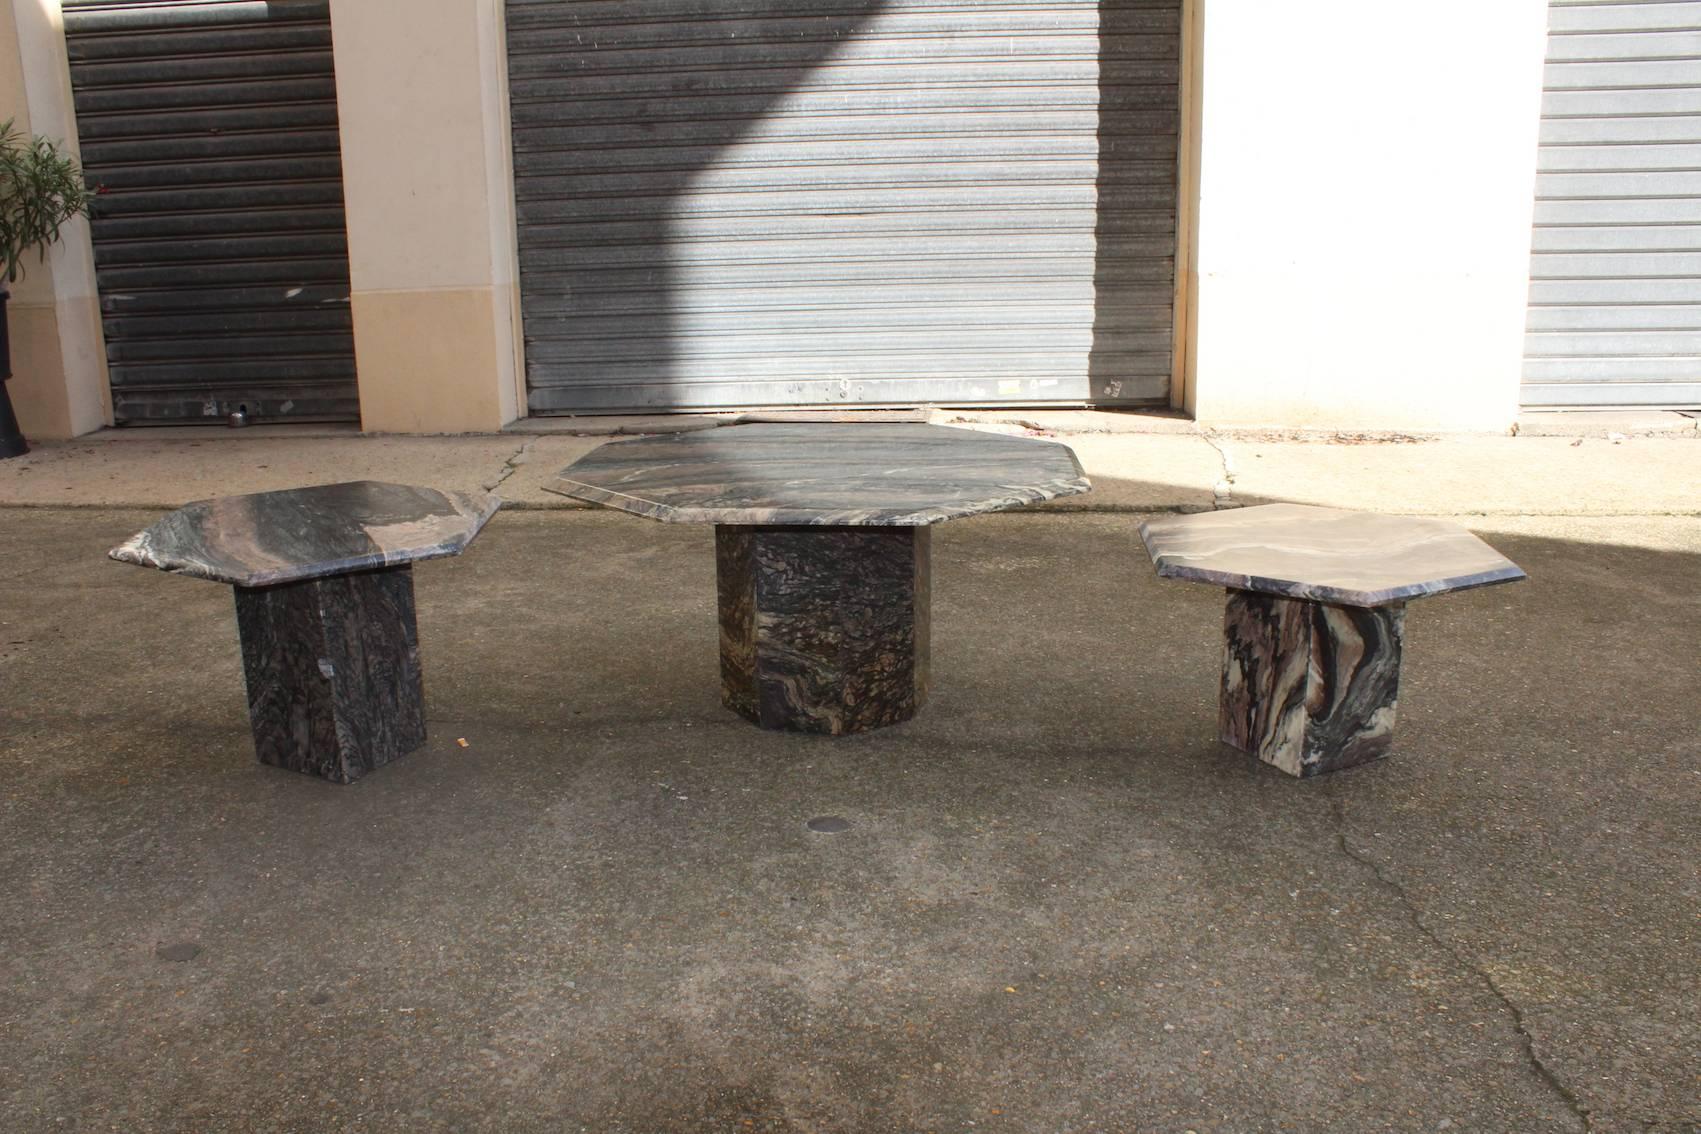 In good condition, a small marble loss on the feet of the main table.
Measures: 63 x 56 x 35 cm
62 x 54 x 41 cm
60 x 54 x 40 cm.